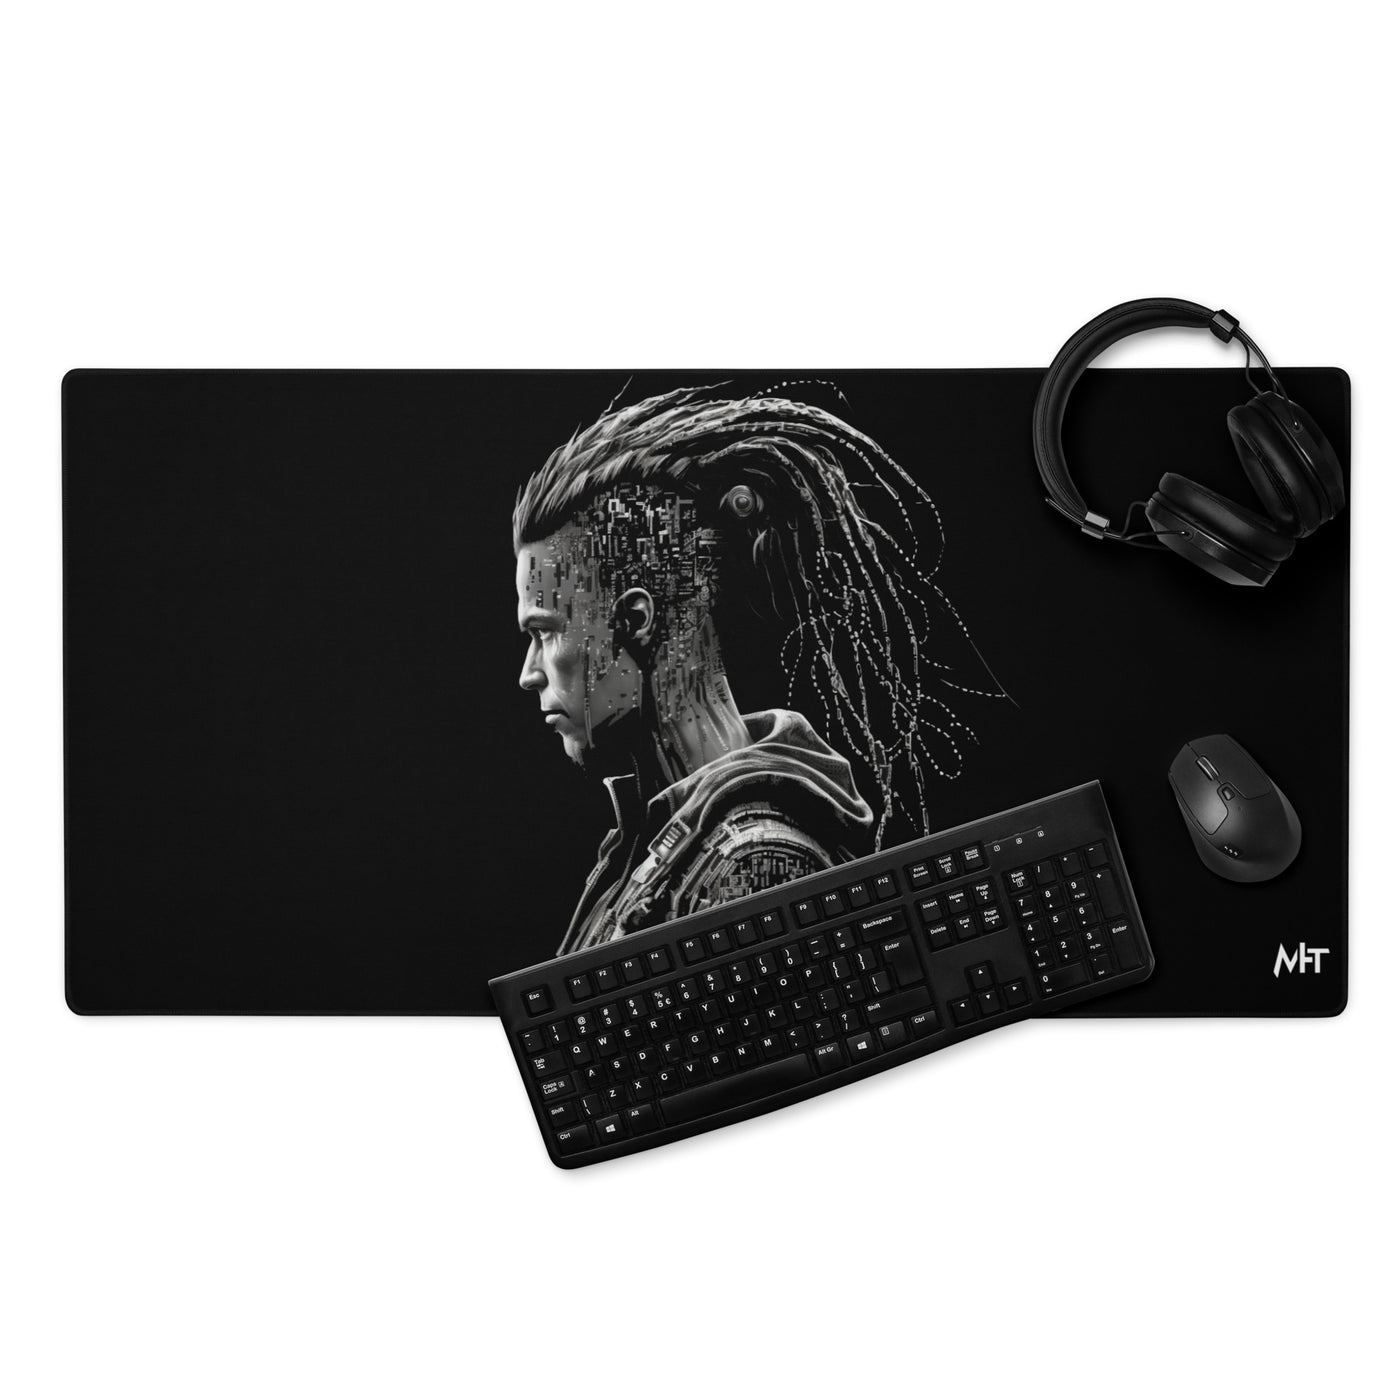 Cyberware assassin v32 - Gaming mouse pad